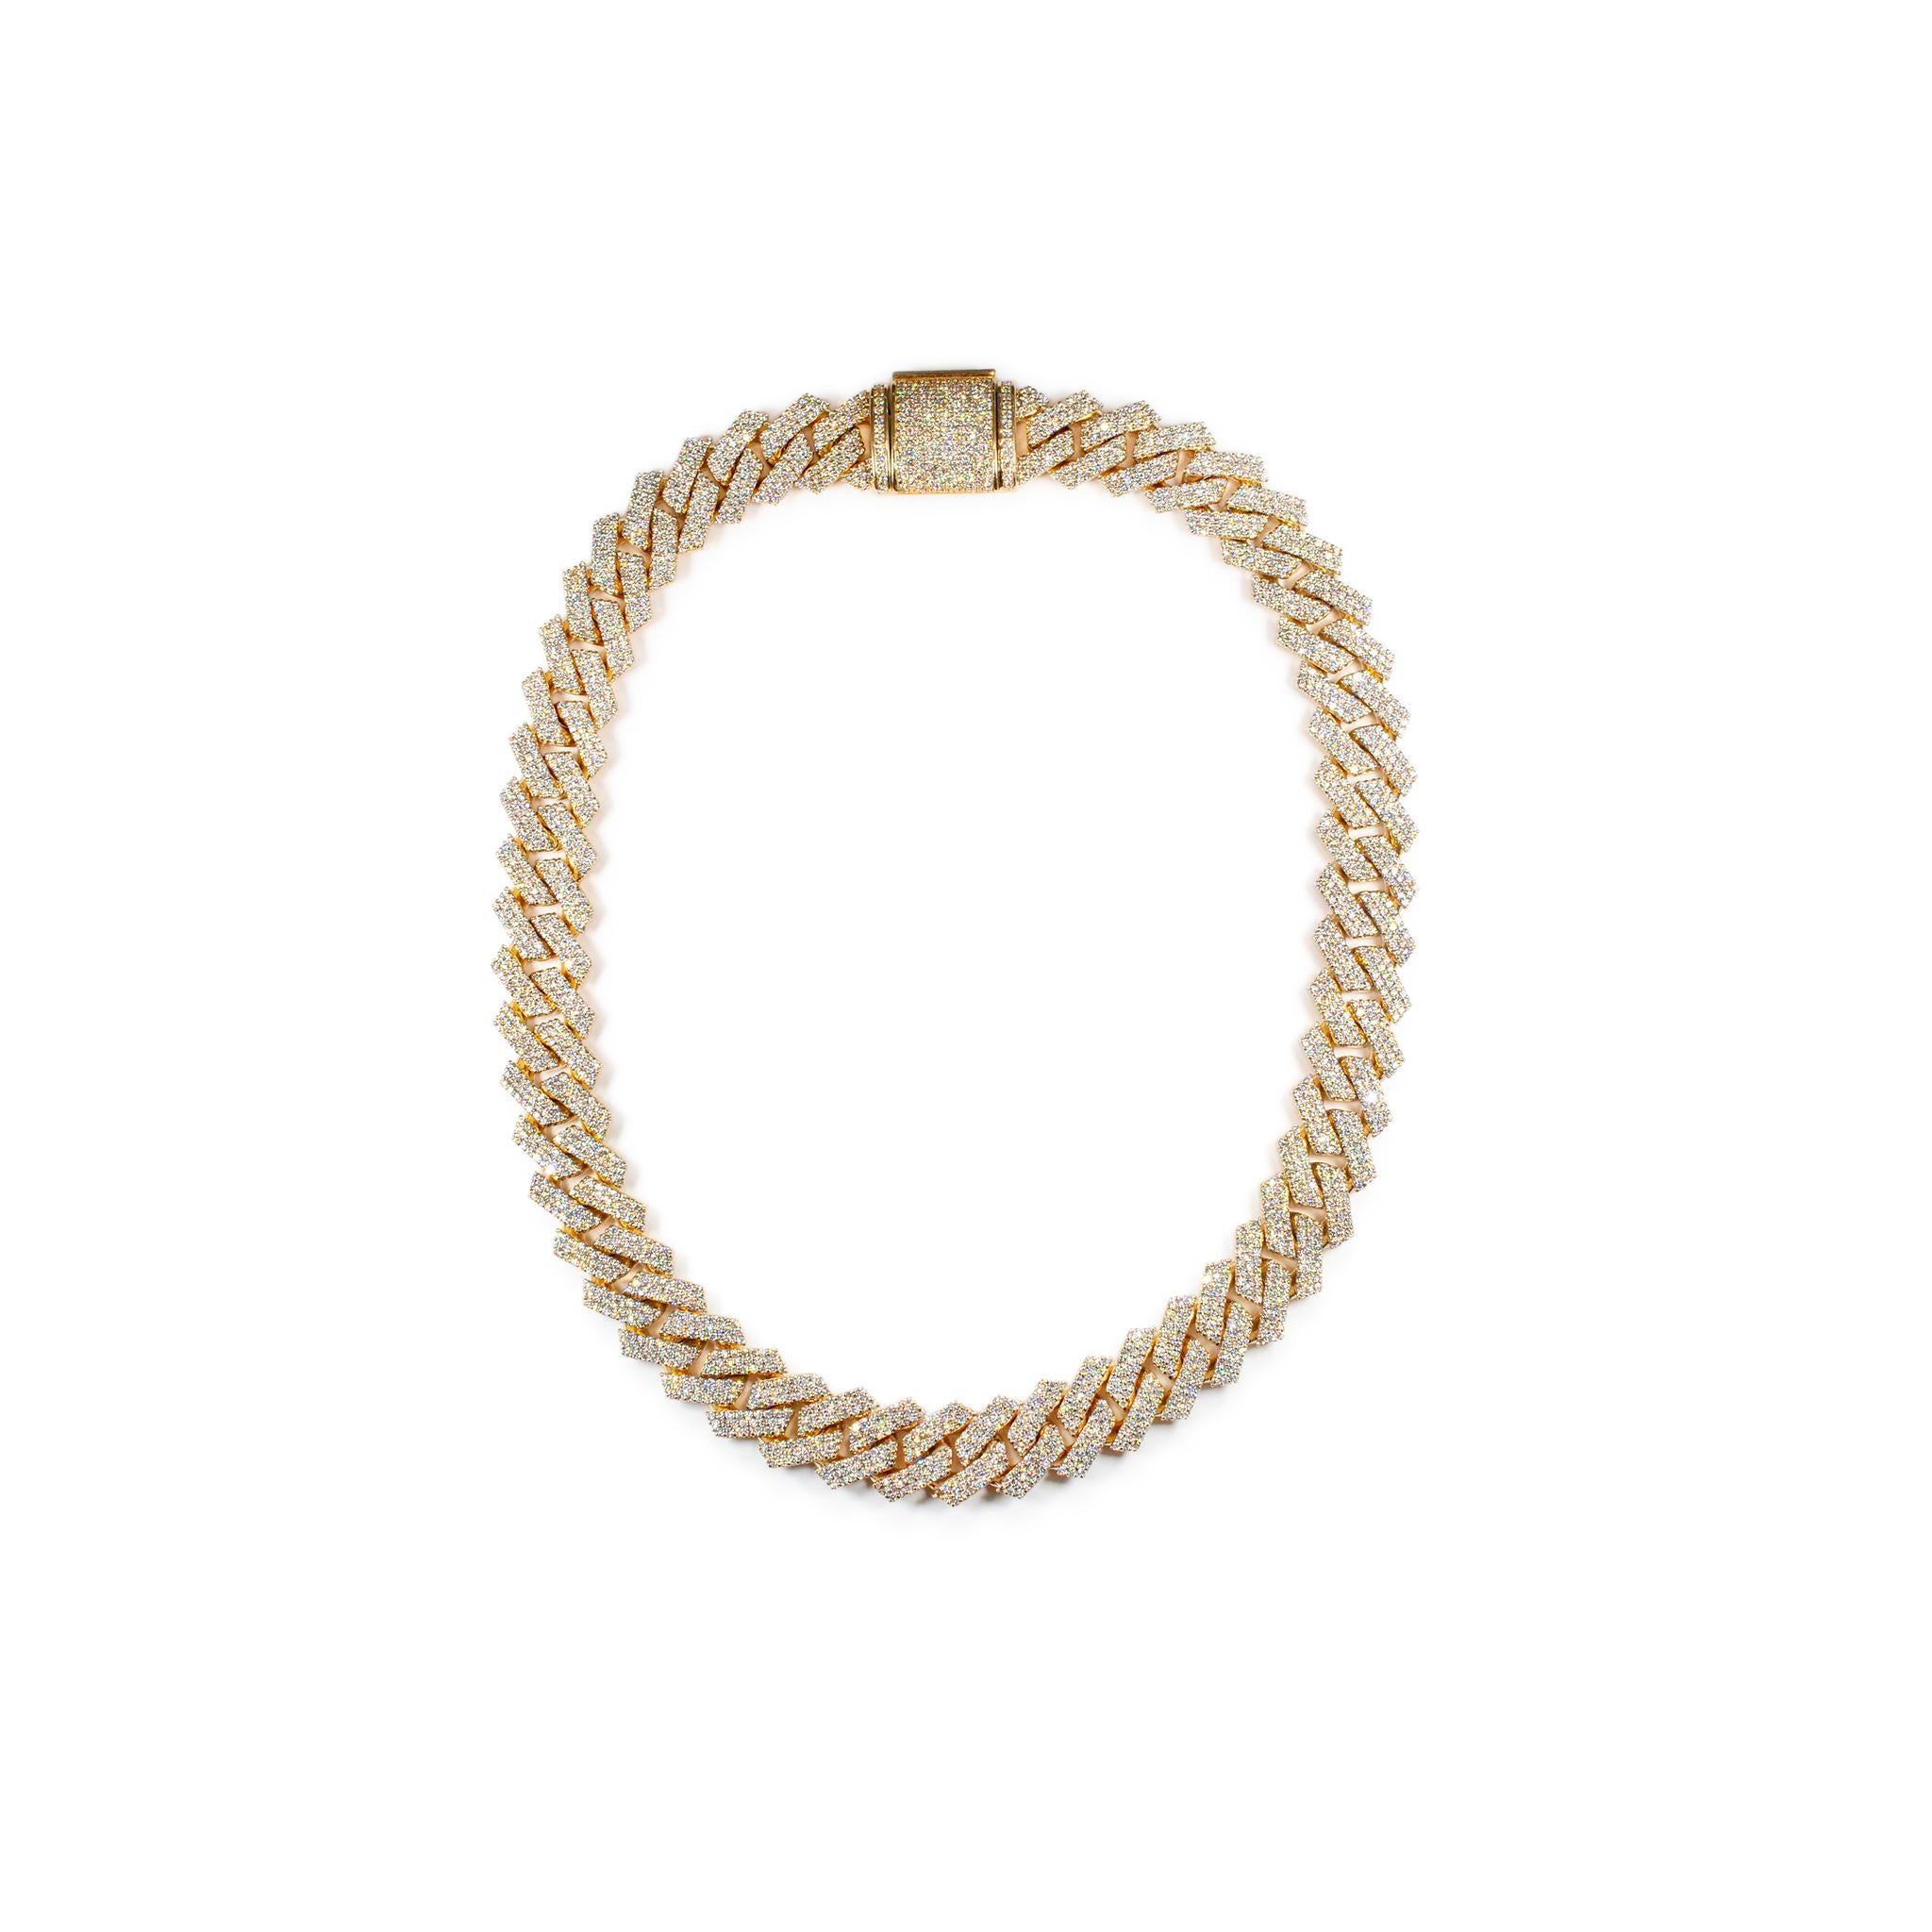 Gender: Ladies

Metal Type: 10K Yellow Gold

Length: 24.00 inches

Width: 20.10 mm

Weight: 338.30 grams

Men's 10K yellow gold single strand diamond necklace.

Pre-owned in excellent condition. Might shows minor signs of wear.

Pavé set in 10 Karat